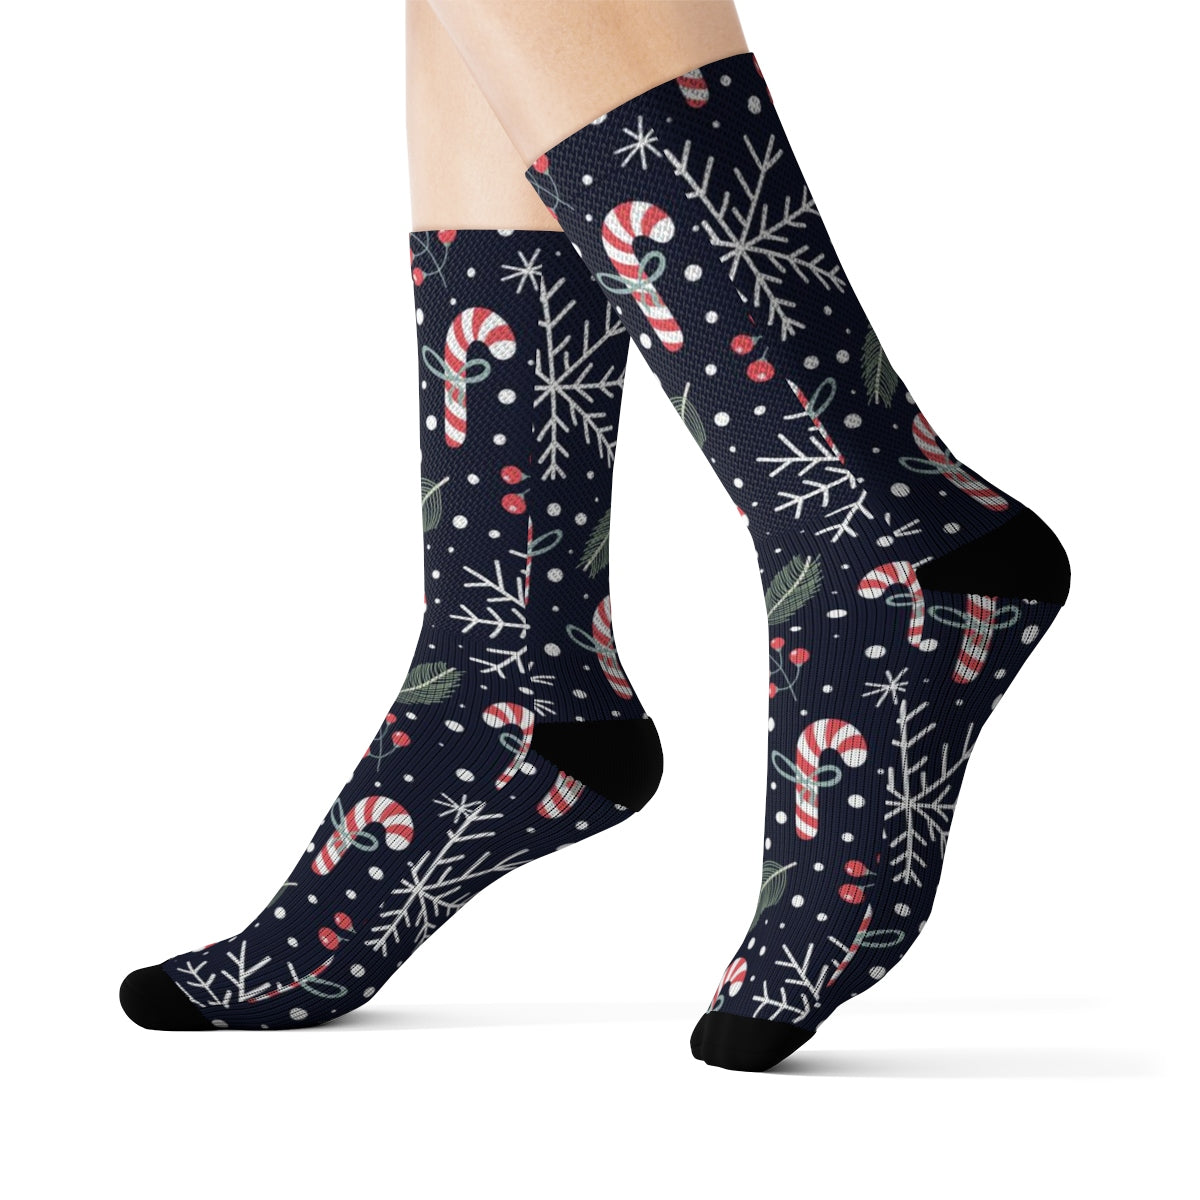 Holiday Christmas Socks, Sugar Candy Cane Snowflakes Winter 3D Sublimation Socks Women Men Fun Cool Funky Crazy Cute Unique Gift Starcove Fashion